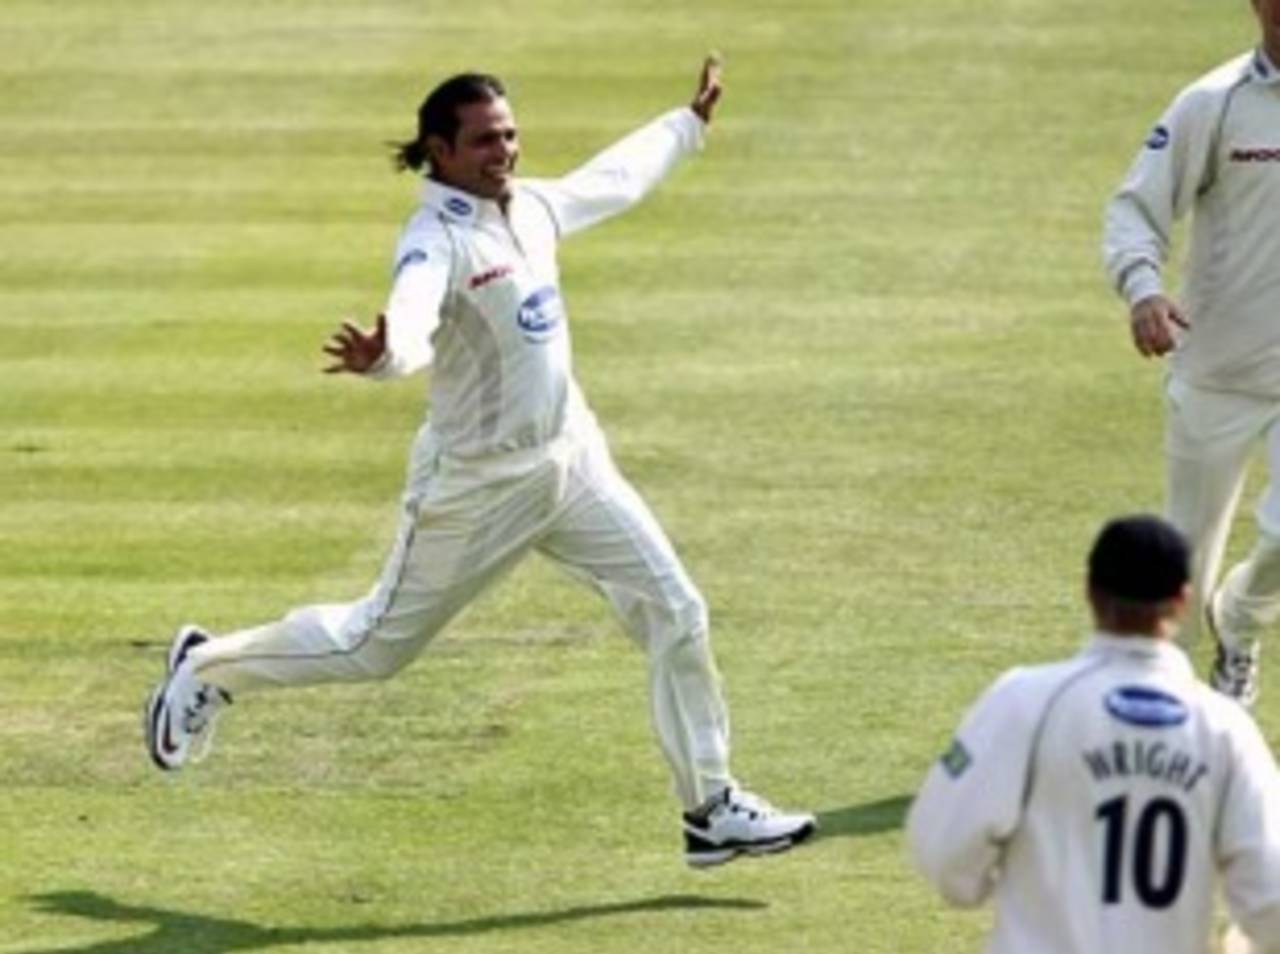 Rana Naved-ul-Hasan led WAPDA to an innings victory with his eight wickets in the match&nbsp;&nbsp;&bull;&nbsp;&nbsp;Getty Images